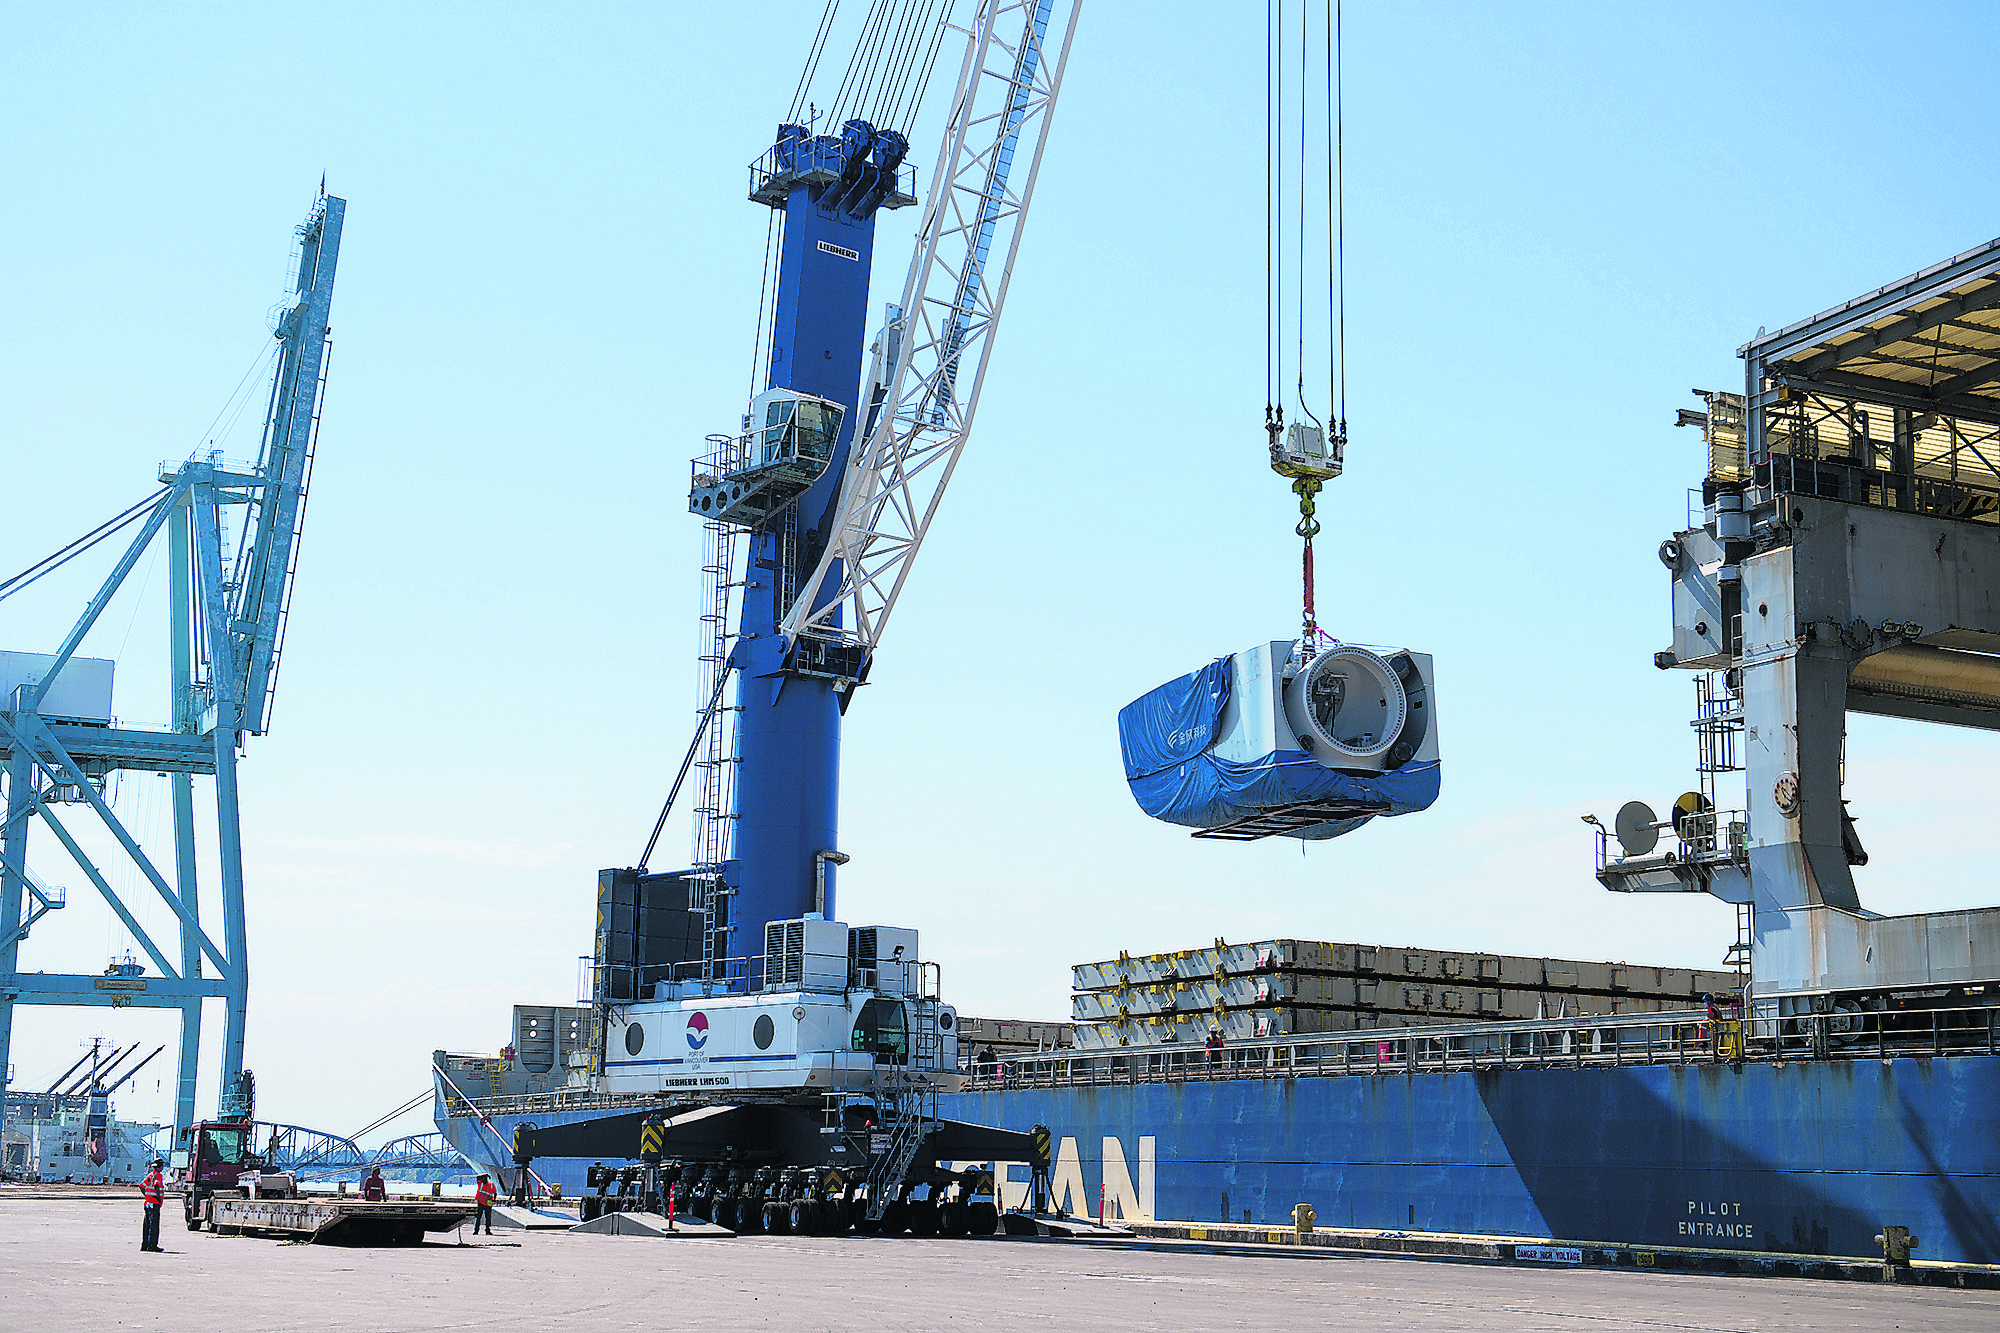 Crews unload a nacelle, the piece where the blades and turbine meet, from a ship at the Port of Vancouver on Monday morning, July 27, 2020.